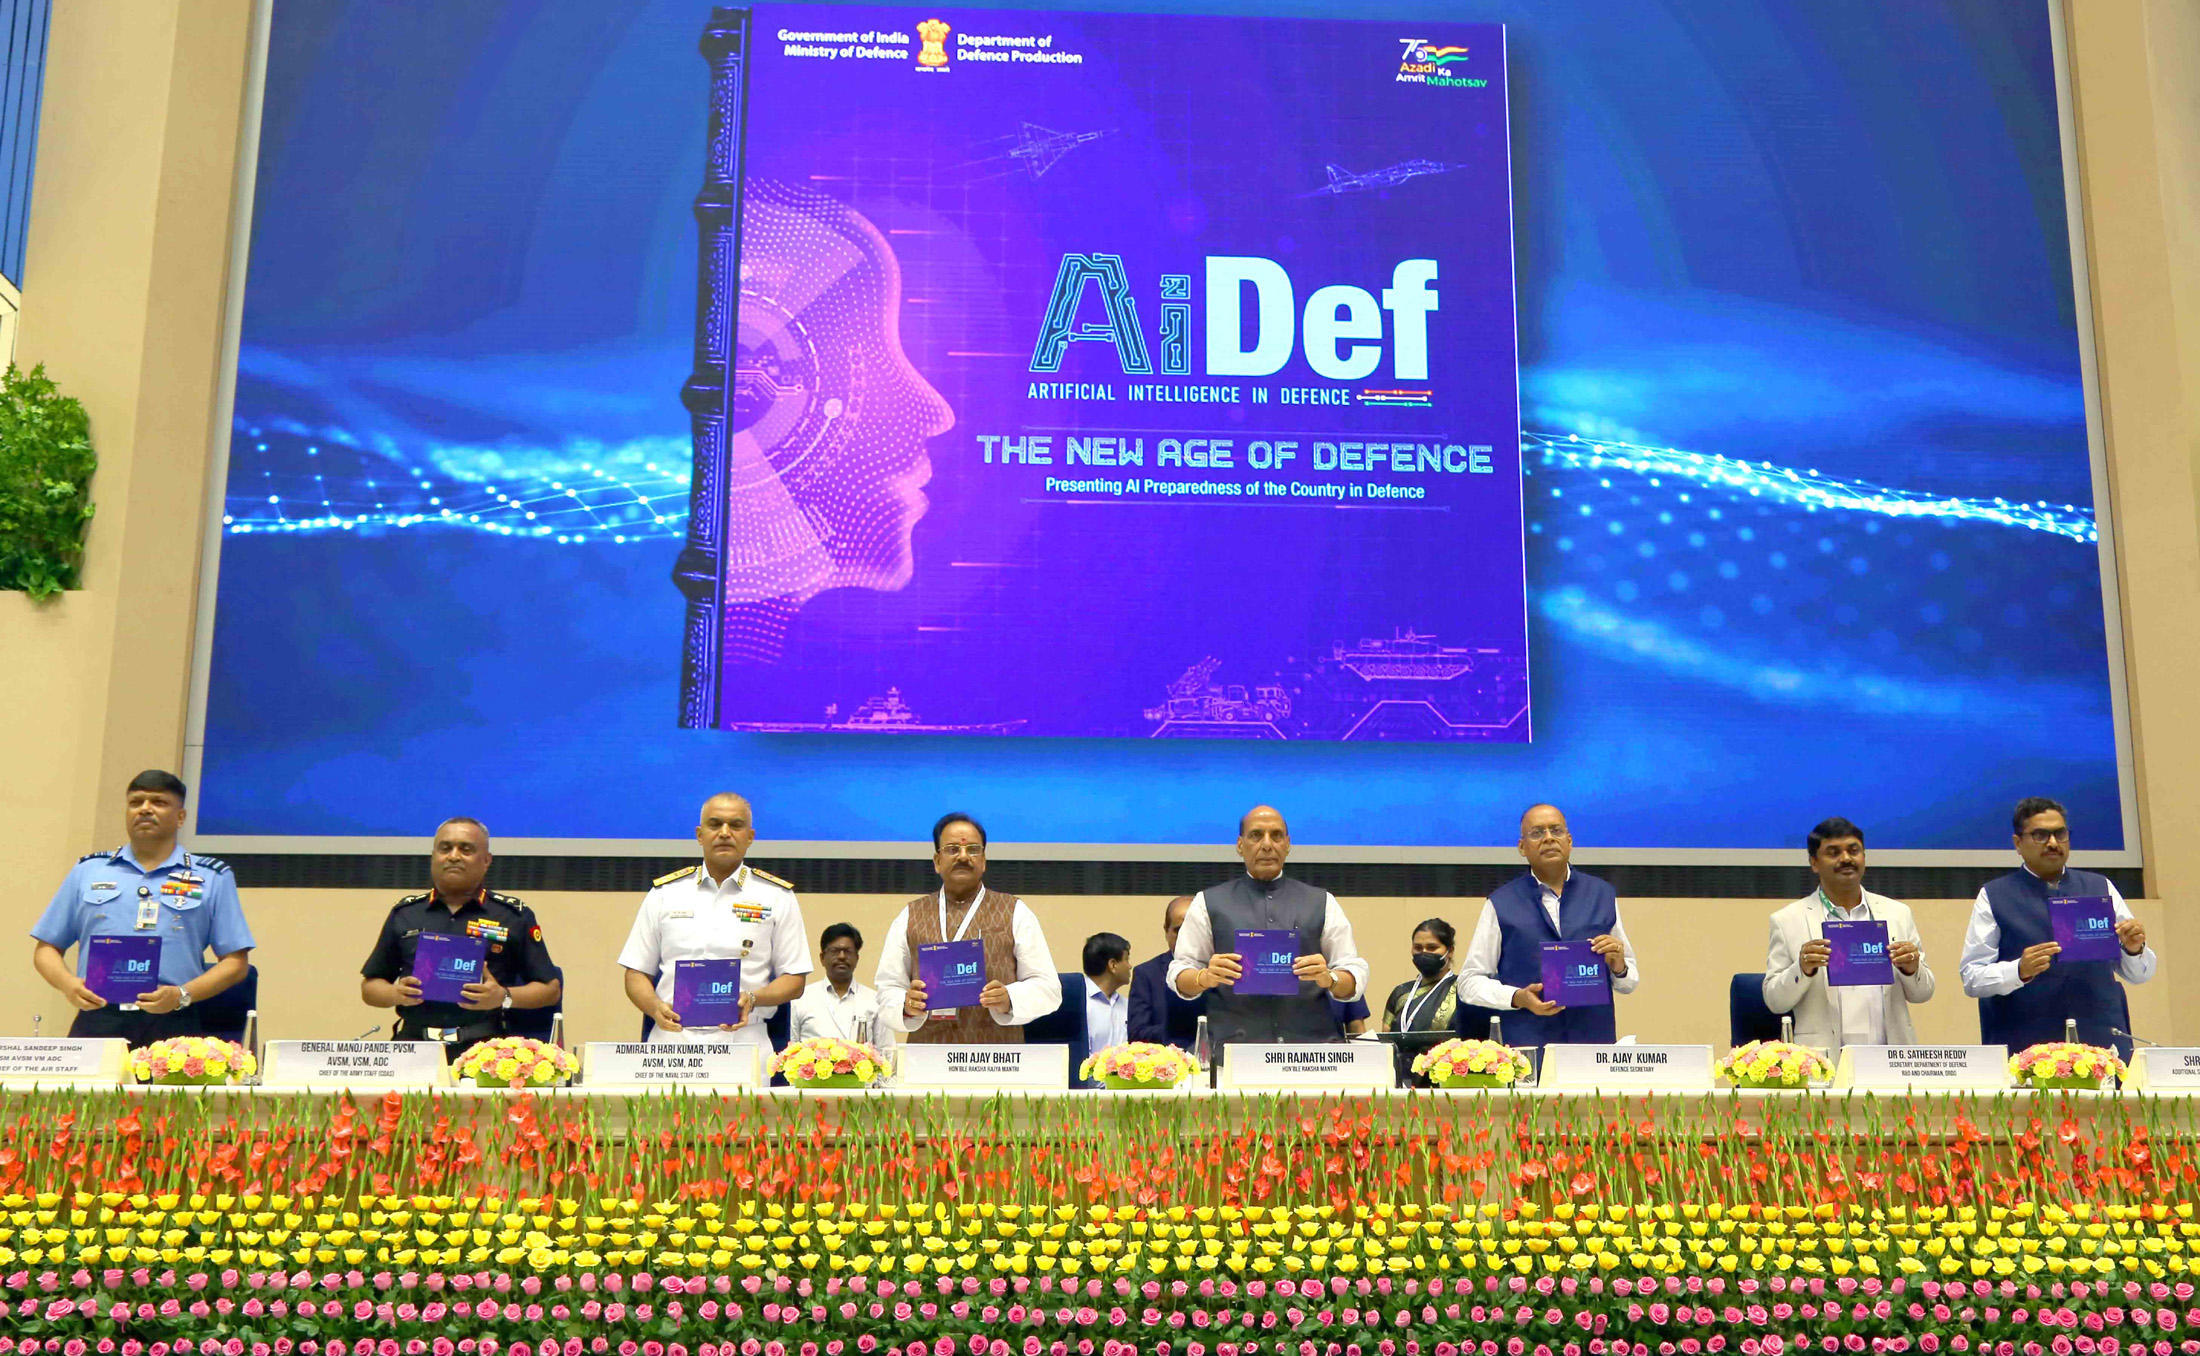 First-ever exhibition and seminar on “AI in Defense” organised